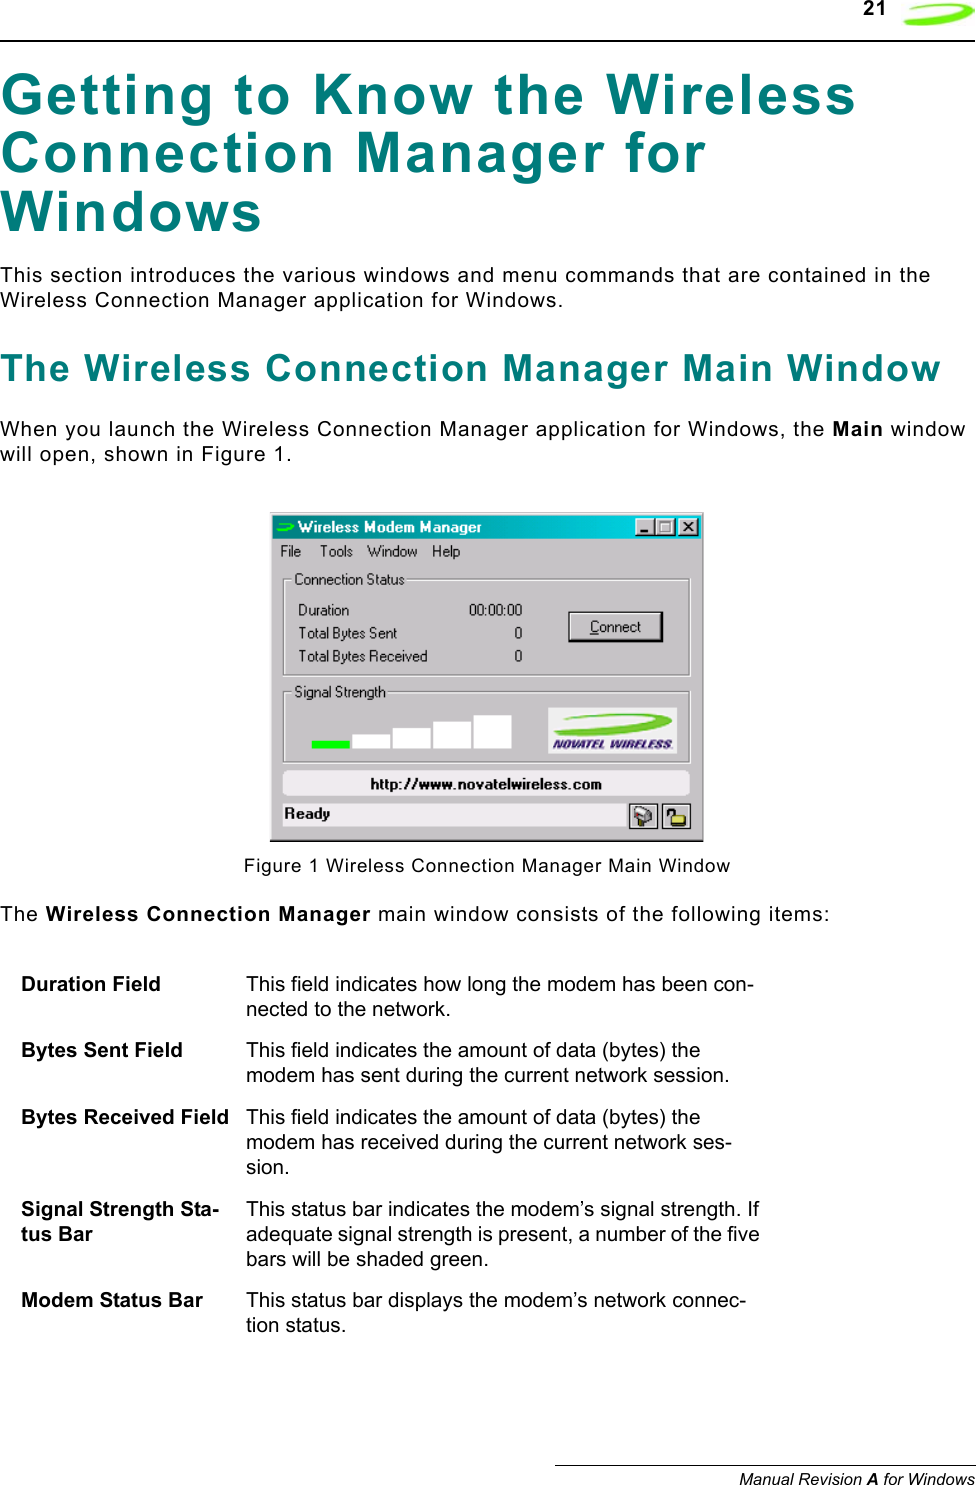    21Manual Revision A for WindowsGetting to Know the Wireless Connection Manager for WindowsThis section introduces the various windows and menu commands that are contained in the Wireless Connection Manager application for Windows.The Wireless Connection Manager Main WindowWhen you launch the Wireless Connection Manager application for Windows, the Main window will open, shown in Figure 1.Figure 1 Wireless Connection Manager Main WindowThe Wireless Connection Manager main window consists of the following items:Duration Field This field indicates how long the modem has been con-nected to the network.Bytes Sent Field This field indicates the amount of data (bytes) the modem has sent during the current network session.Bytes Received Field This field indicates the amount of data (bytes) the modem has received during the current network ses-sion.Signal Strength Sta-tus BarThis status bar indicates the modem’s signal strength. If adequate signal strength is present, a number of the five bars will be shaded green. Modem Status Bar This status bar displays the modem’s network connec-tion status.